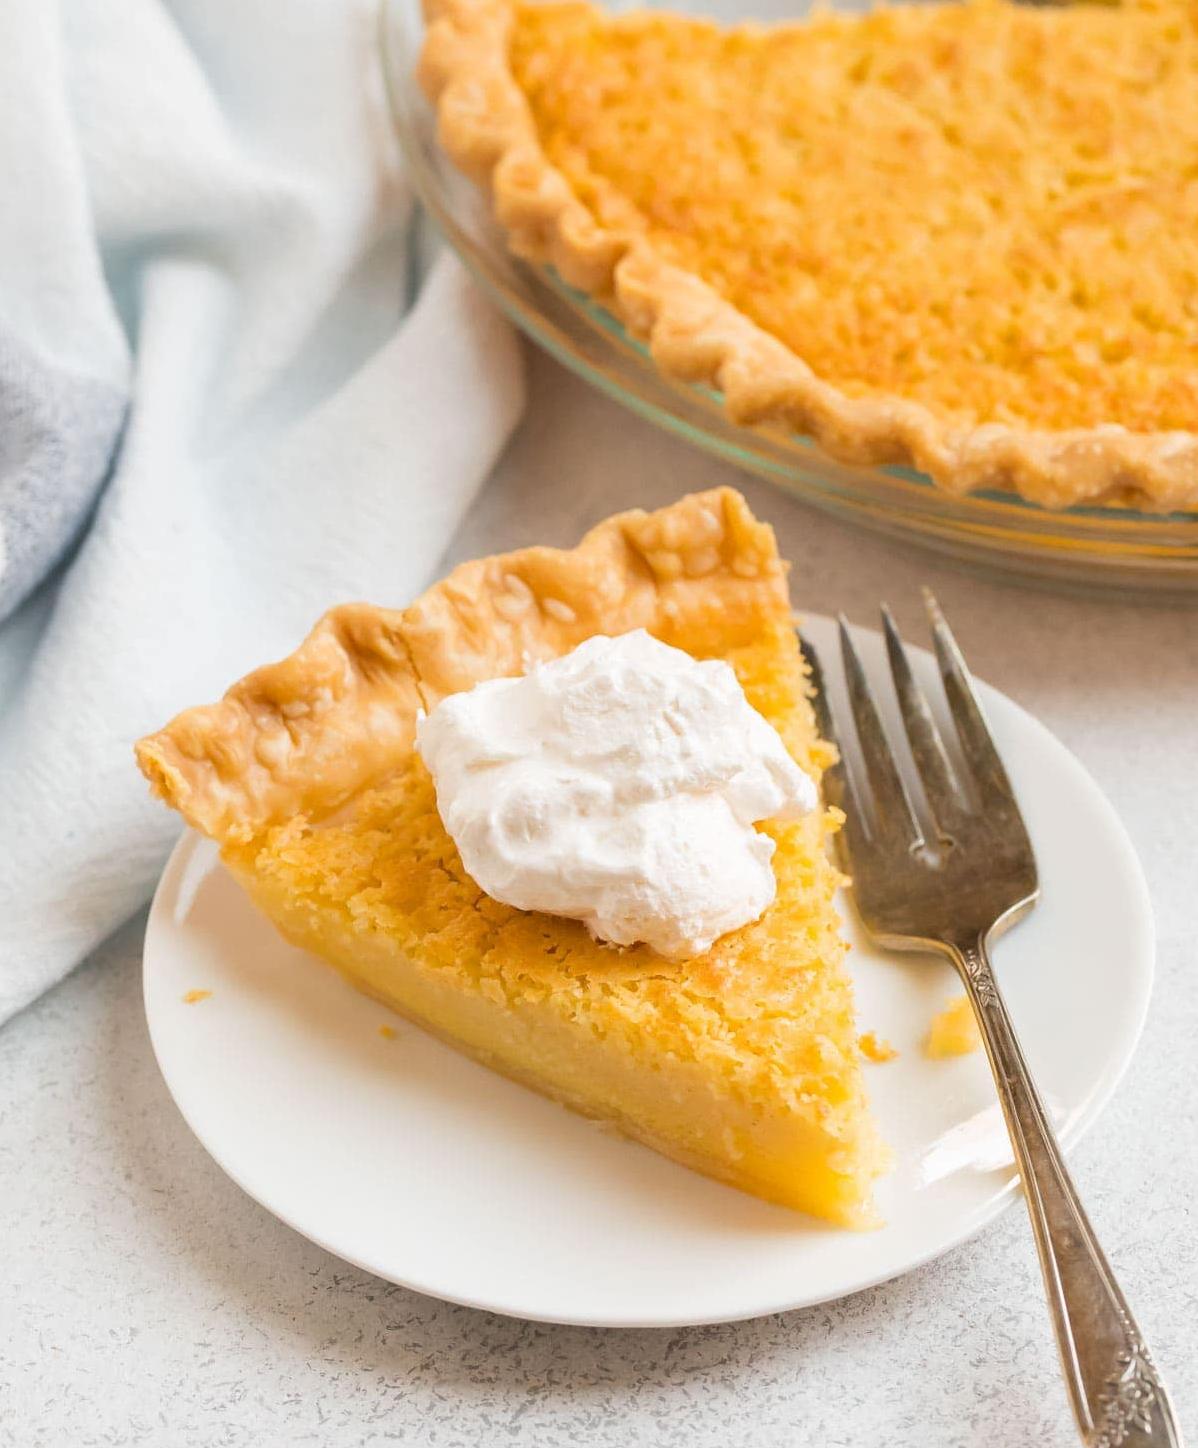  A golden brown crust with a smooth, creamy filling.